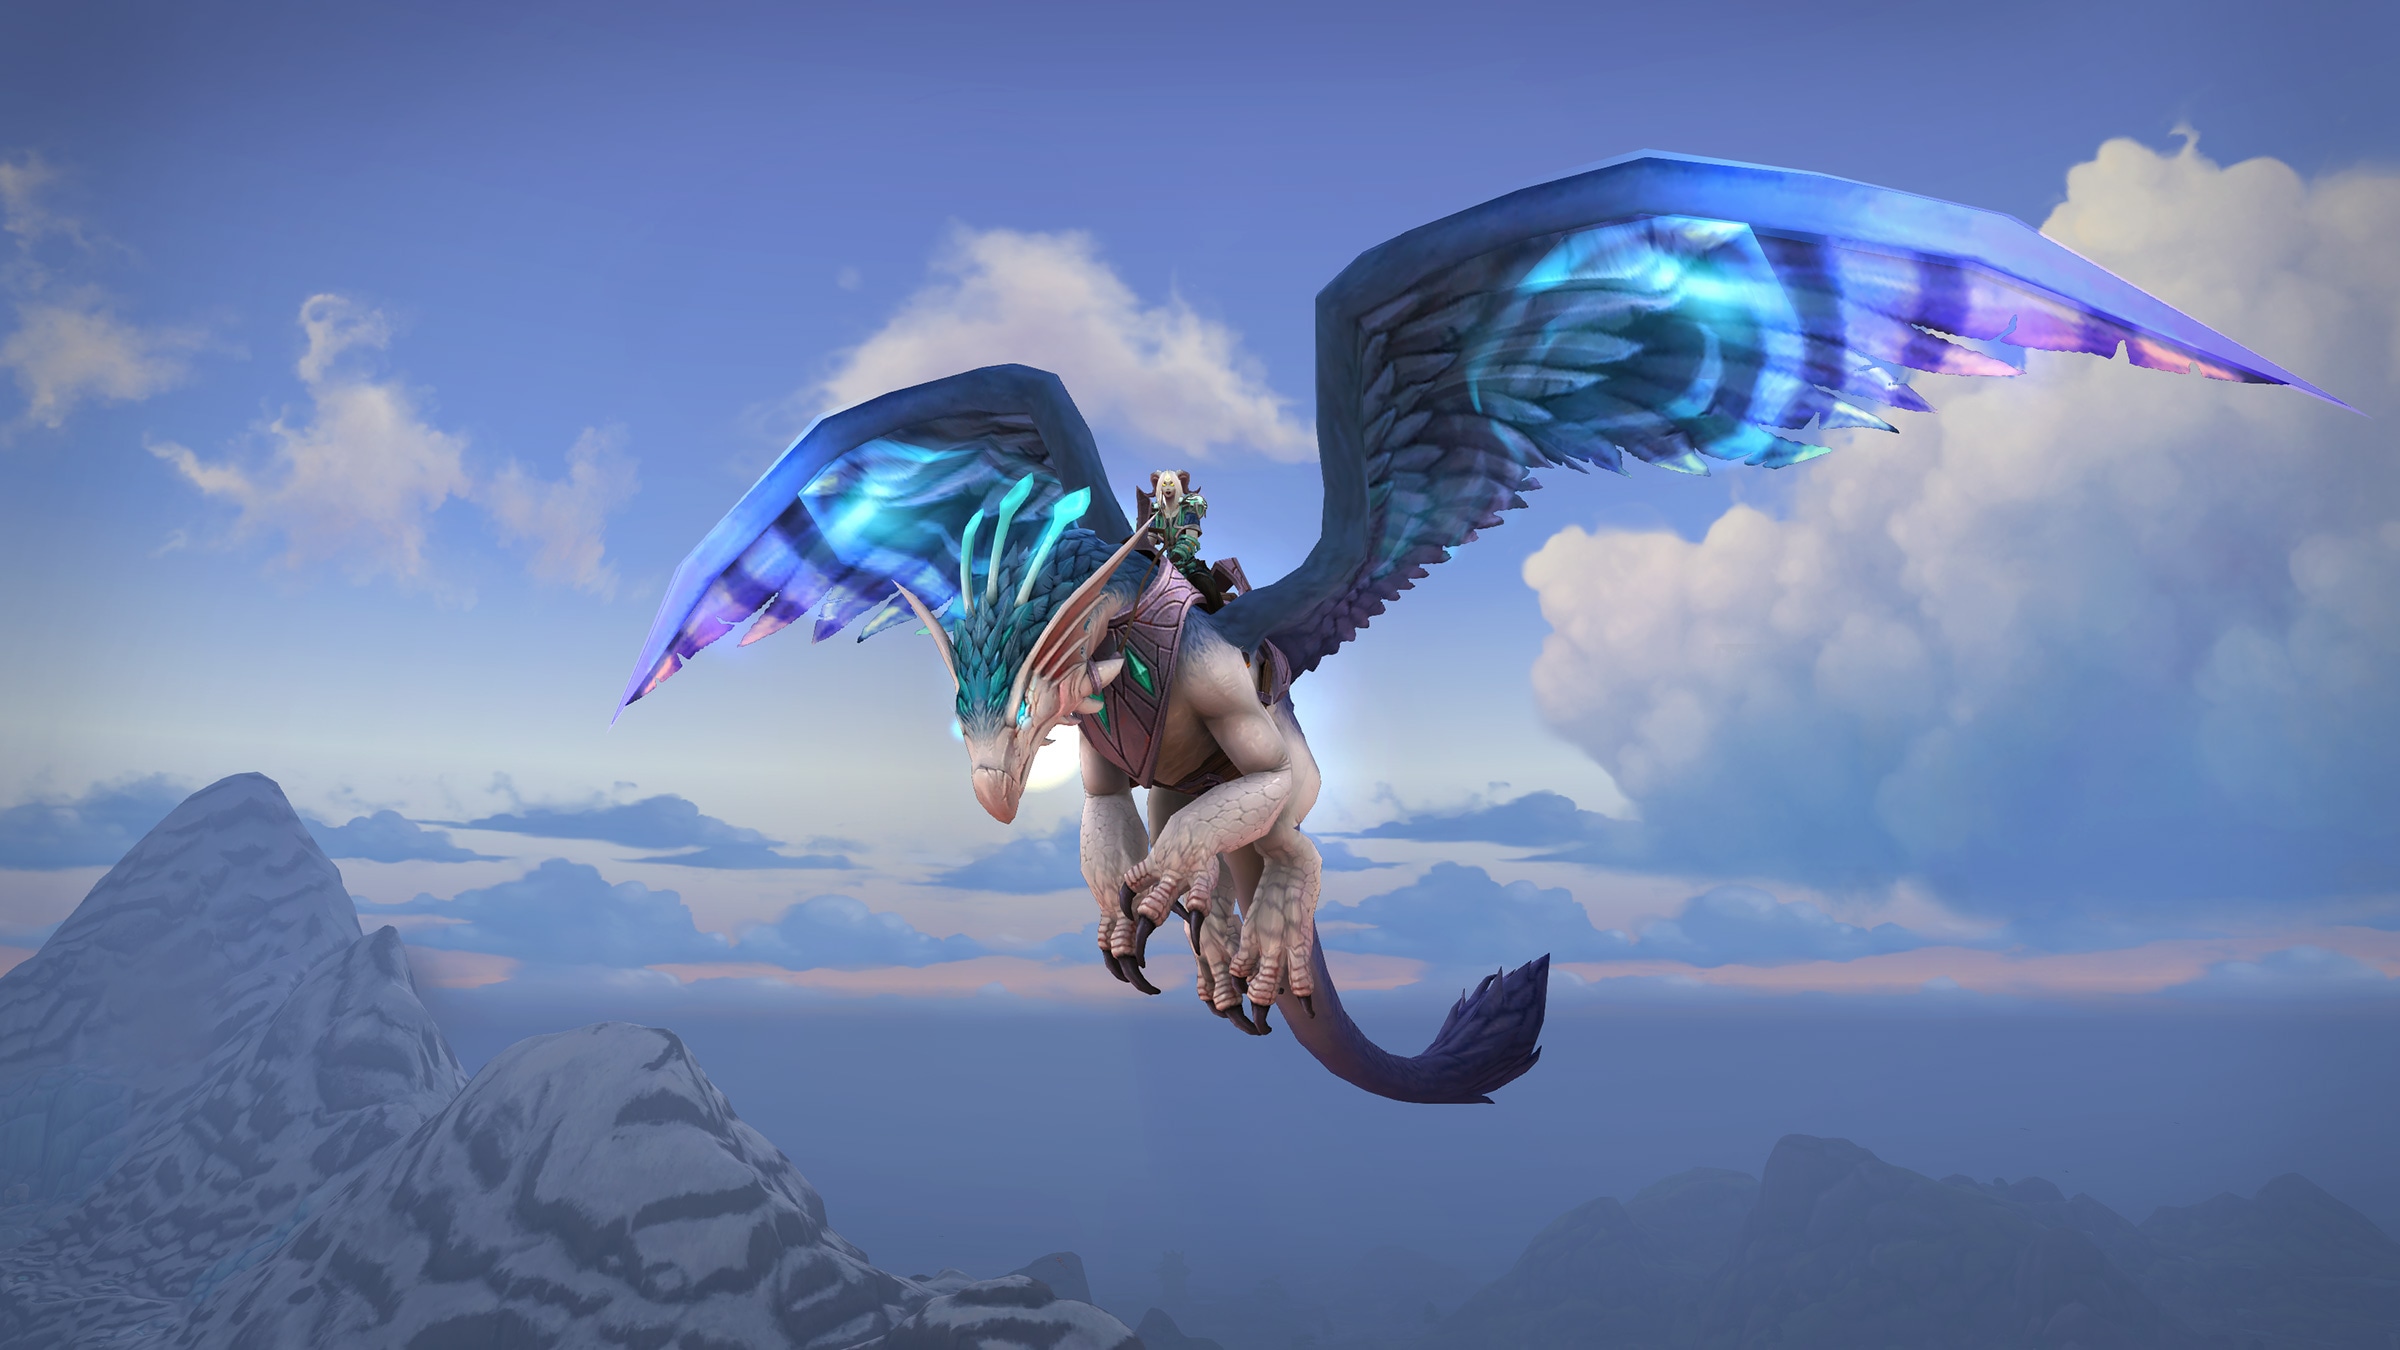 Purchase a 6 Month Subscription and Get a New Mount!